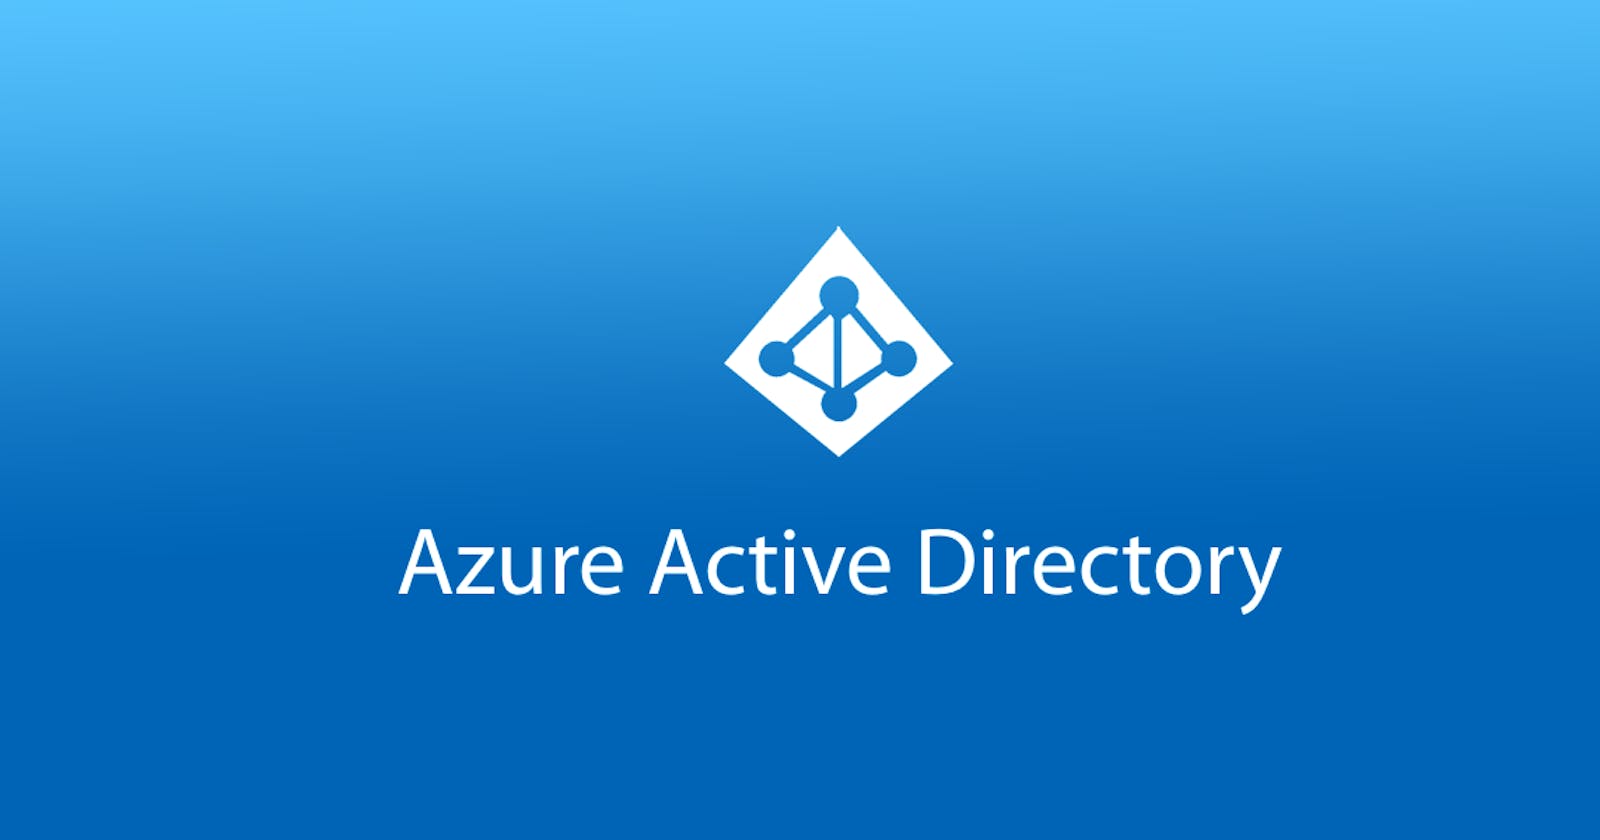 Azure Active Directory: Creation of new tenant and user